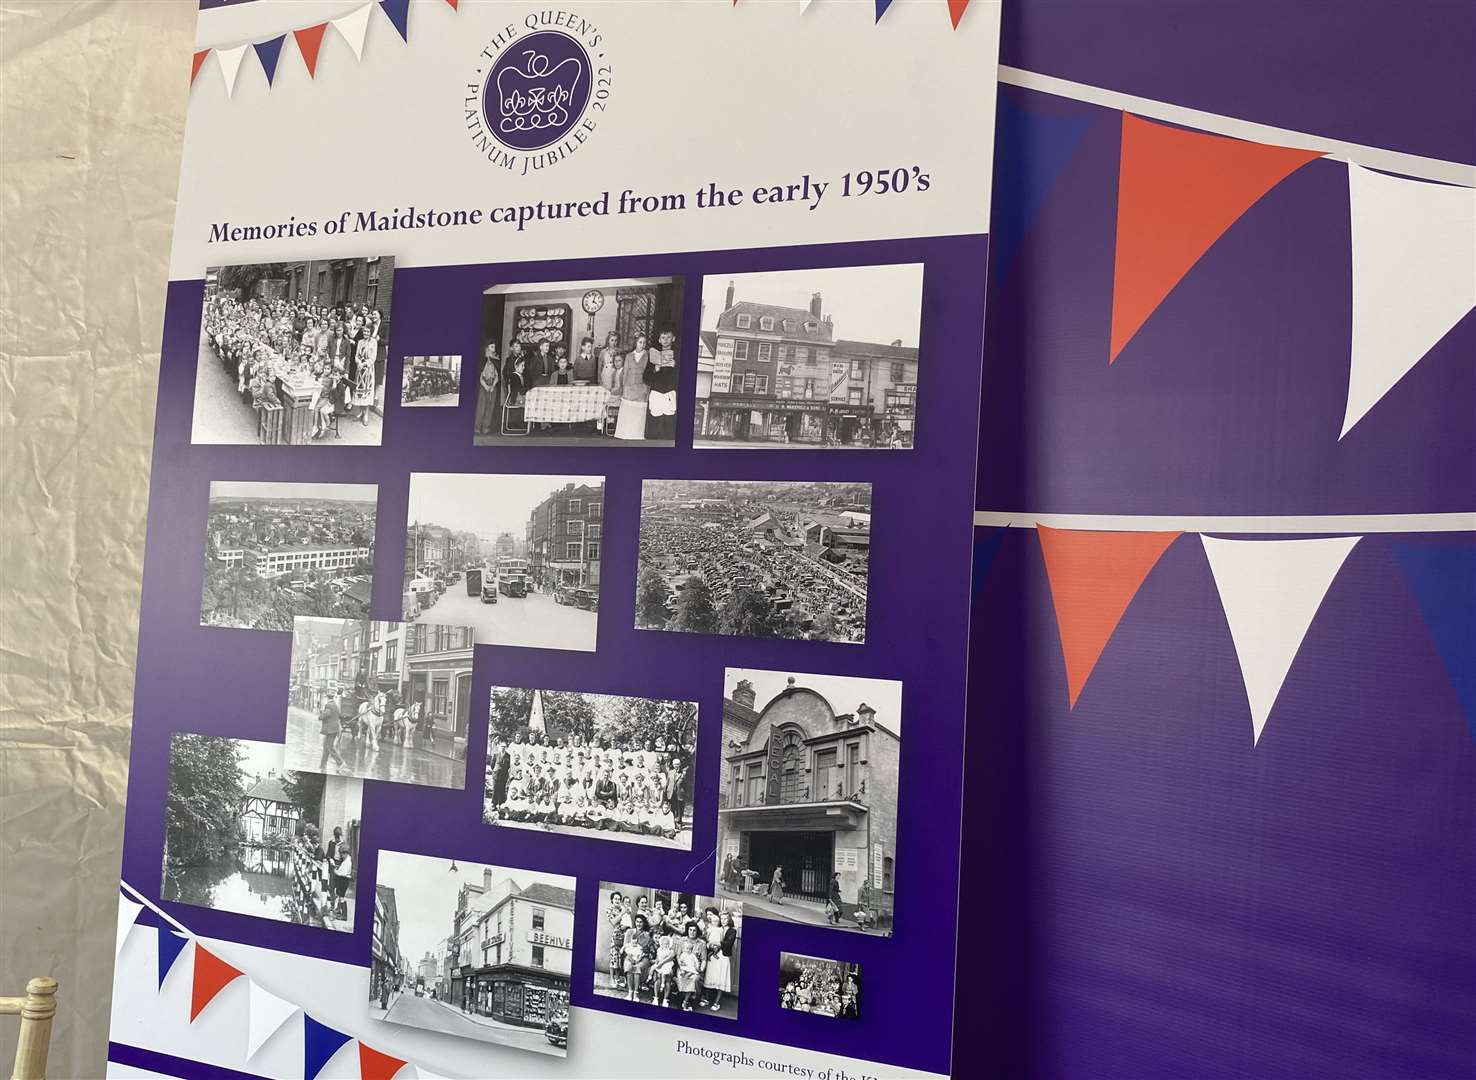 Archive photos captured from the early 1950's were on display